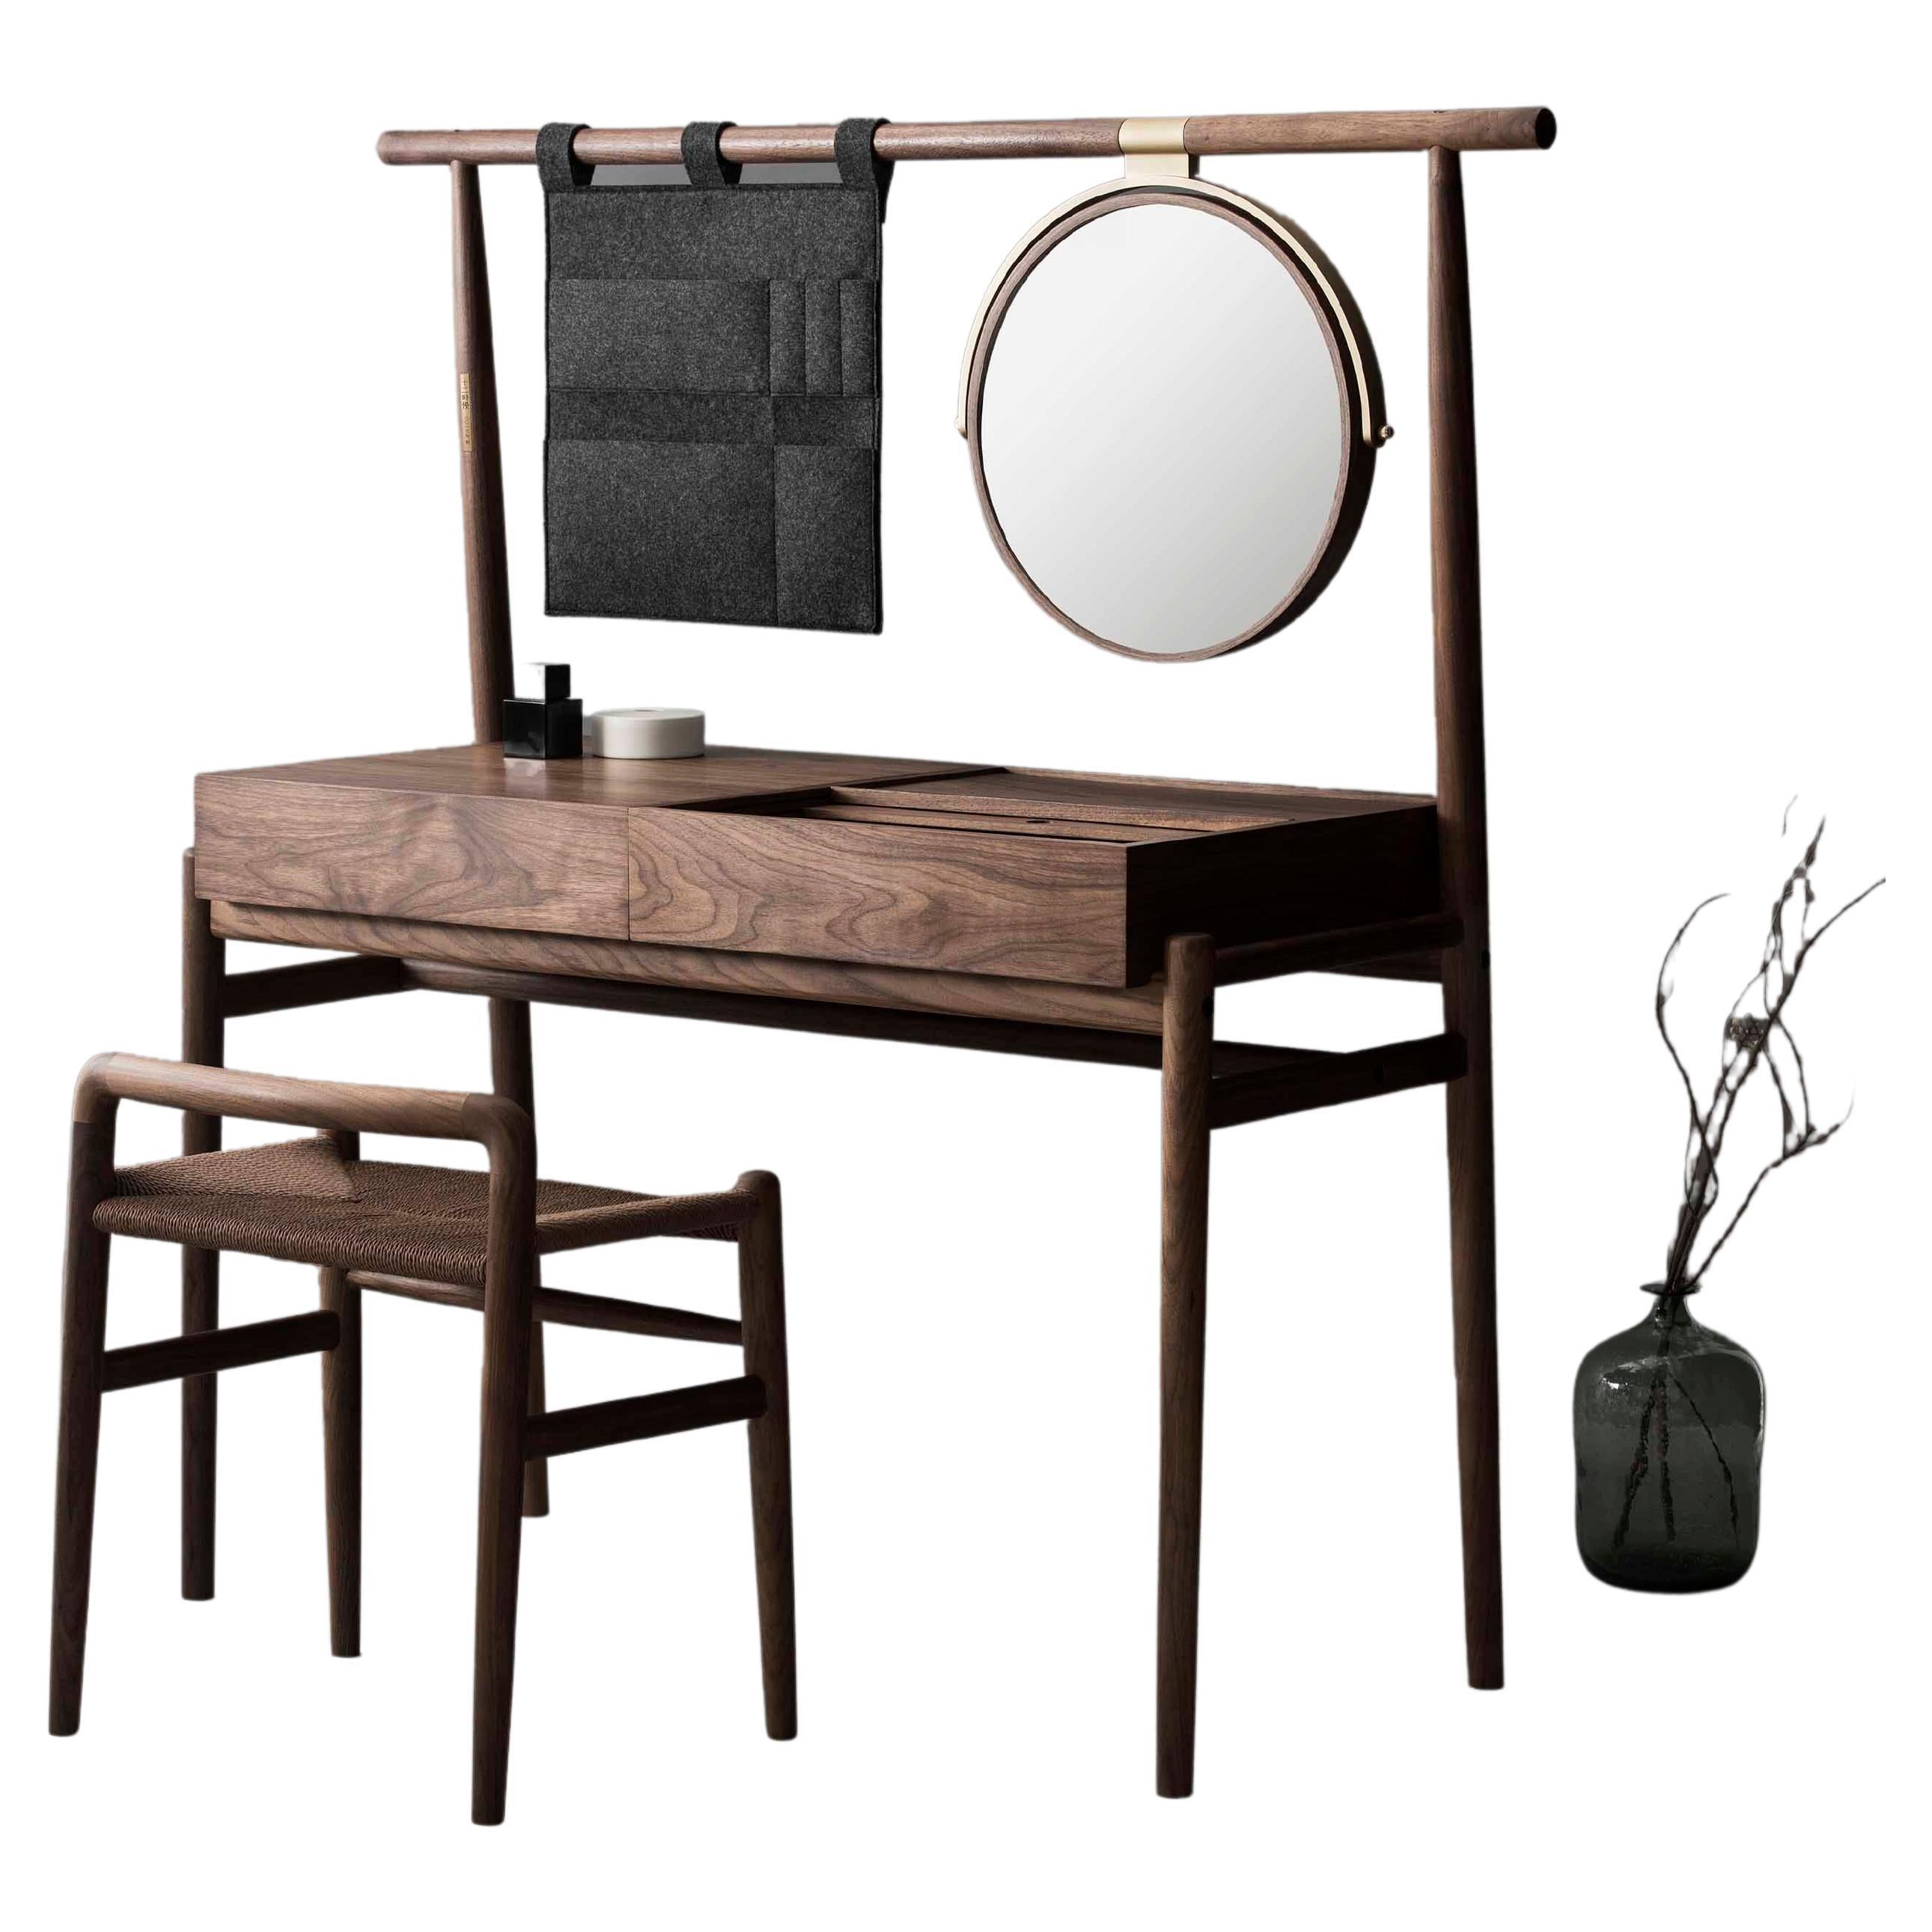 Once used as a bride’s dowry in Ancient China, the dressing table has a rich history that extends beyond vanity. The Wabi Dressing Table is an expression of understated elegance and beauty that comes with age. Inspired by the principles of